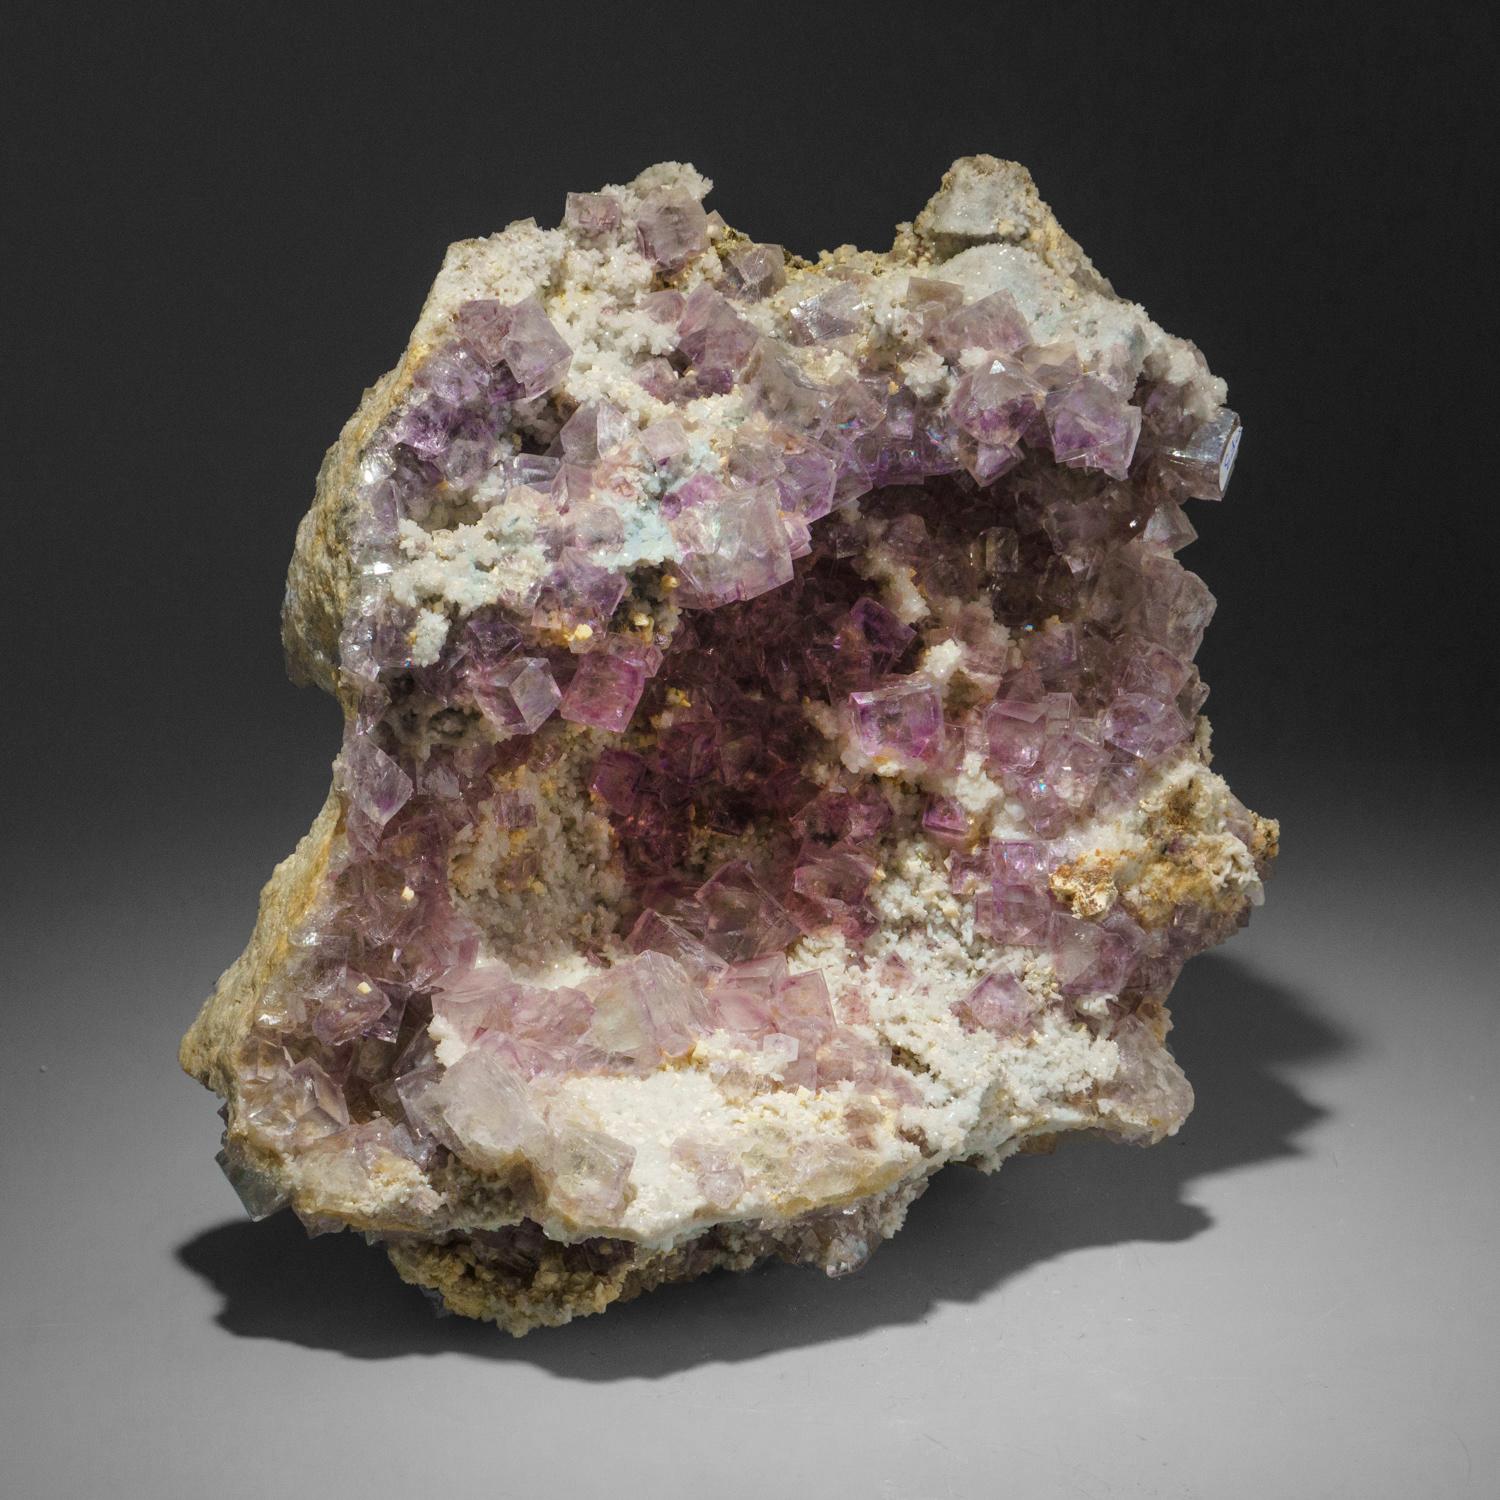 From Minggang Mine, Henan Province, China

Large well defined cubic formation of fluorite crystals with crystal faces composed of smaller sub-parallel cubic faces. The fluorite has a pale yellow core with purple zoning. This fluorite is grown